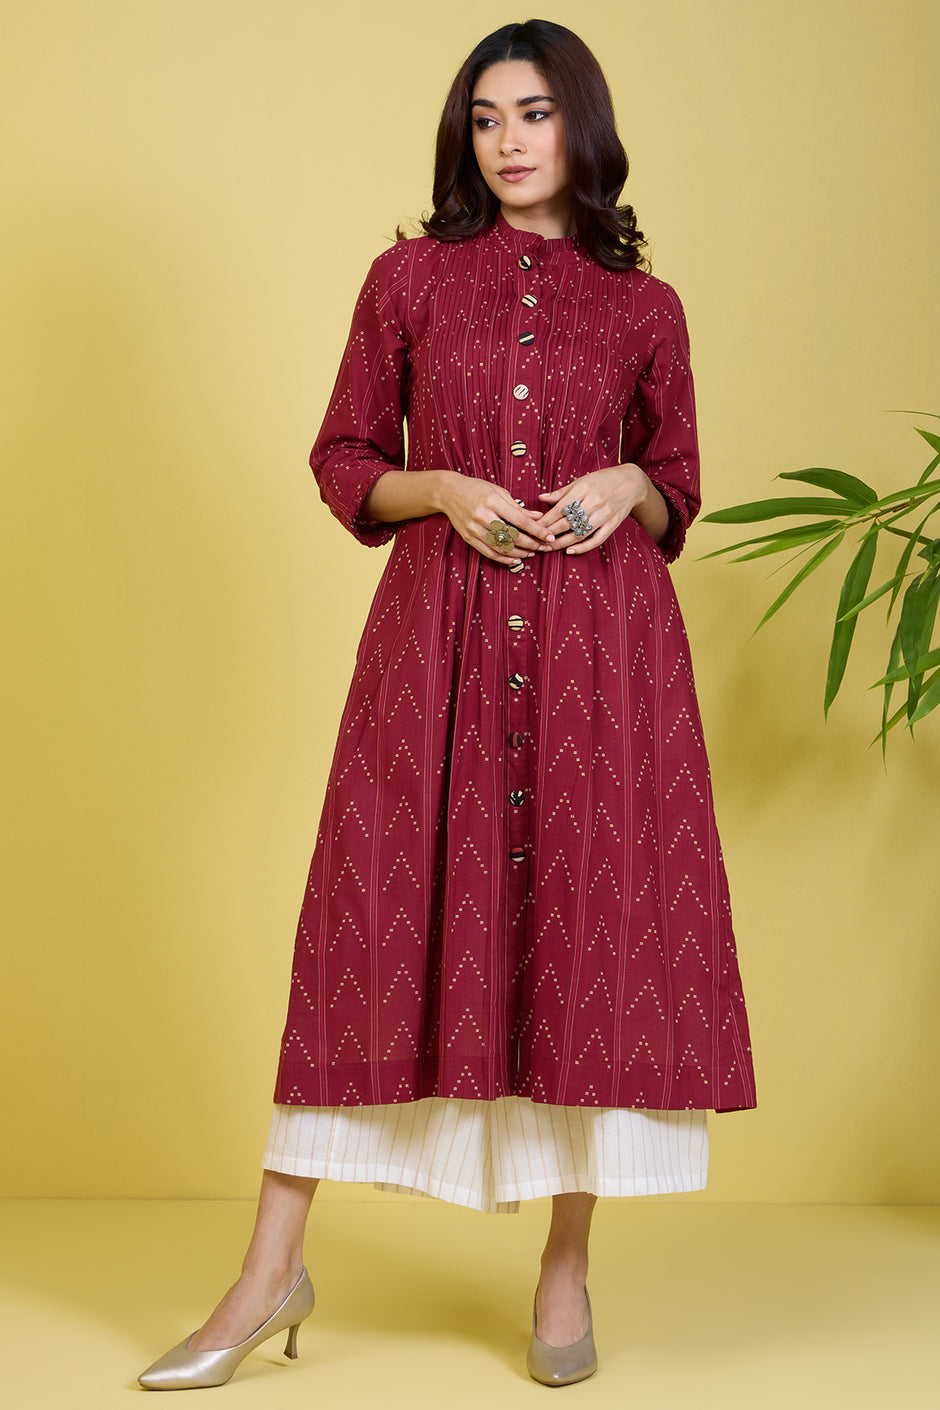 A collection of Brand-new dresses for women - maati crafts